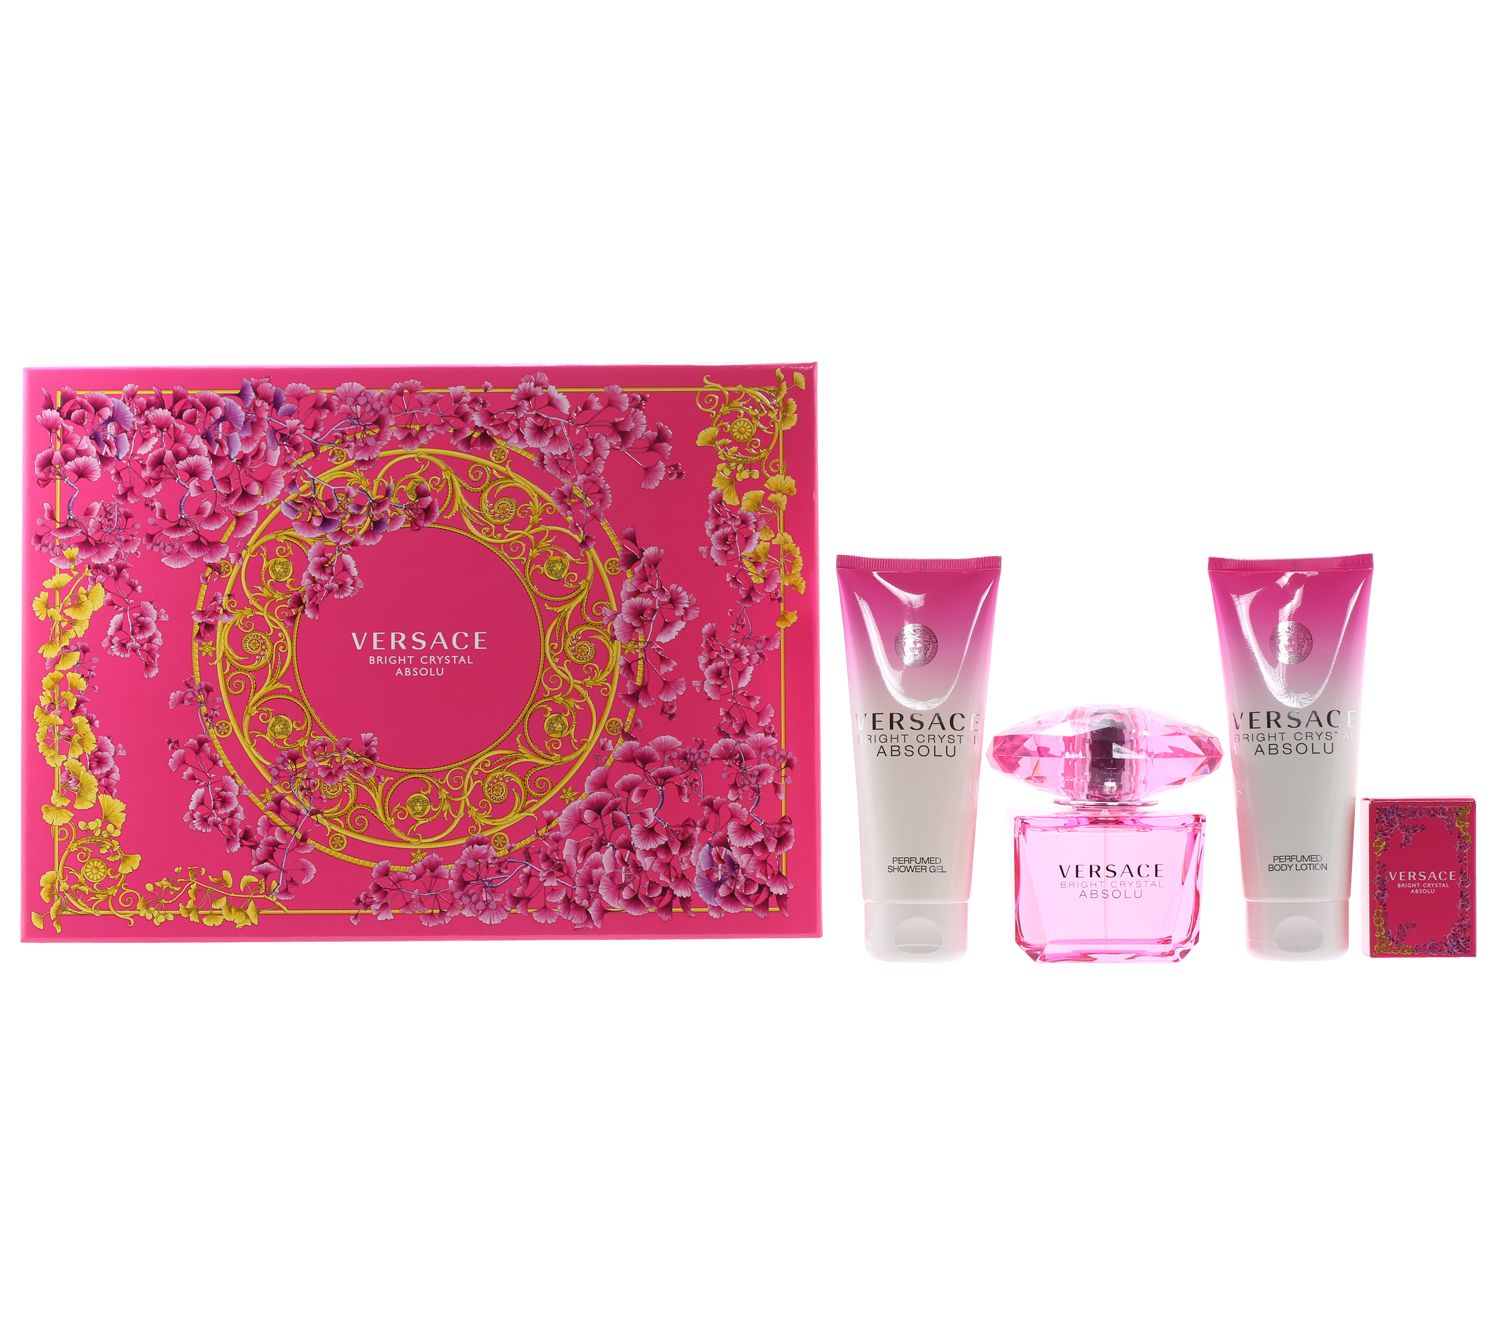 Discrepantie Staat zuiger Versace Bright Crystal Absolu 4-Piece Gift Set - QVC.com